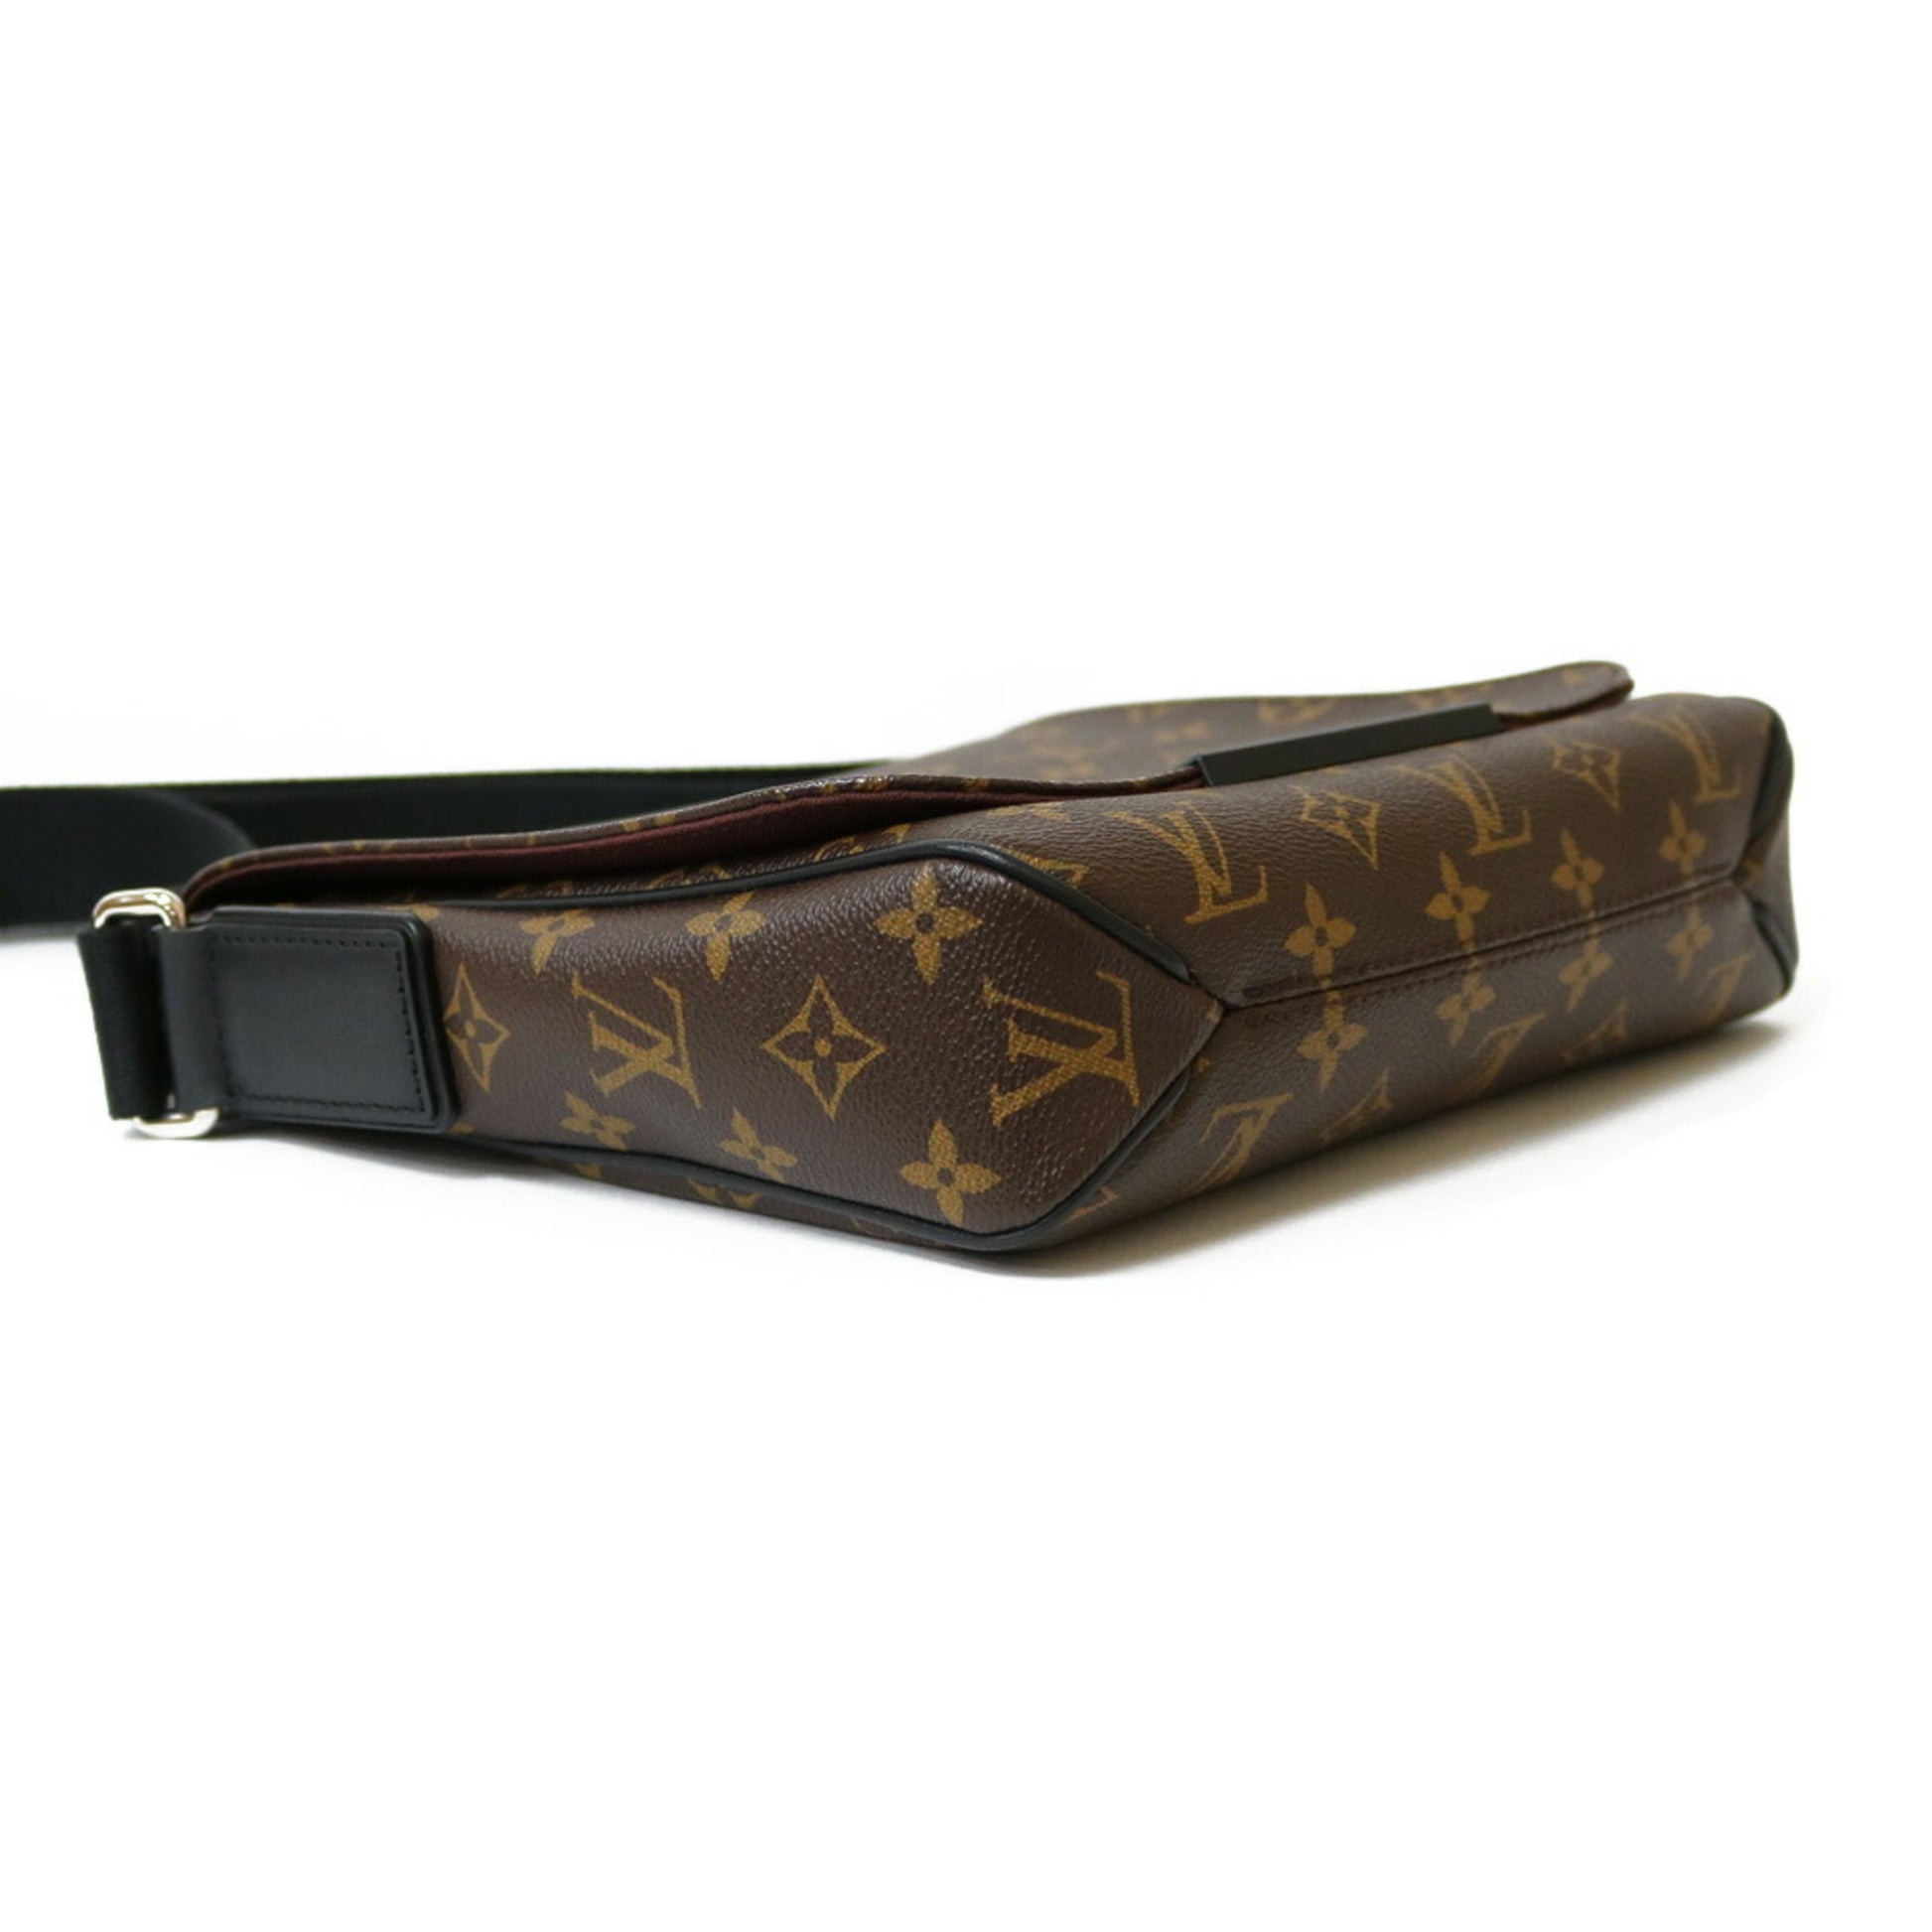 Buy Free Shipping [Used] LOUIS VUITTON Shoulder Bag District PM Monogram  Macassar M40935 from Japan - Buy authentic Plus exclusive items from Japan